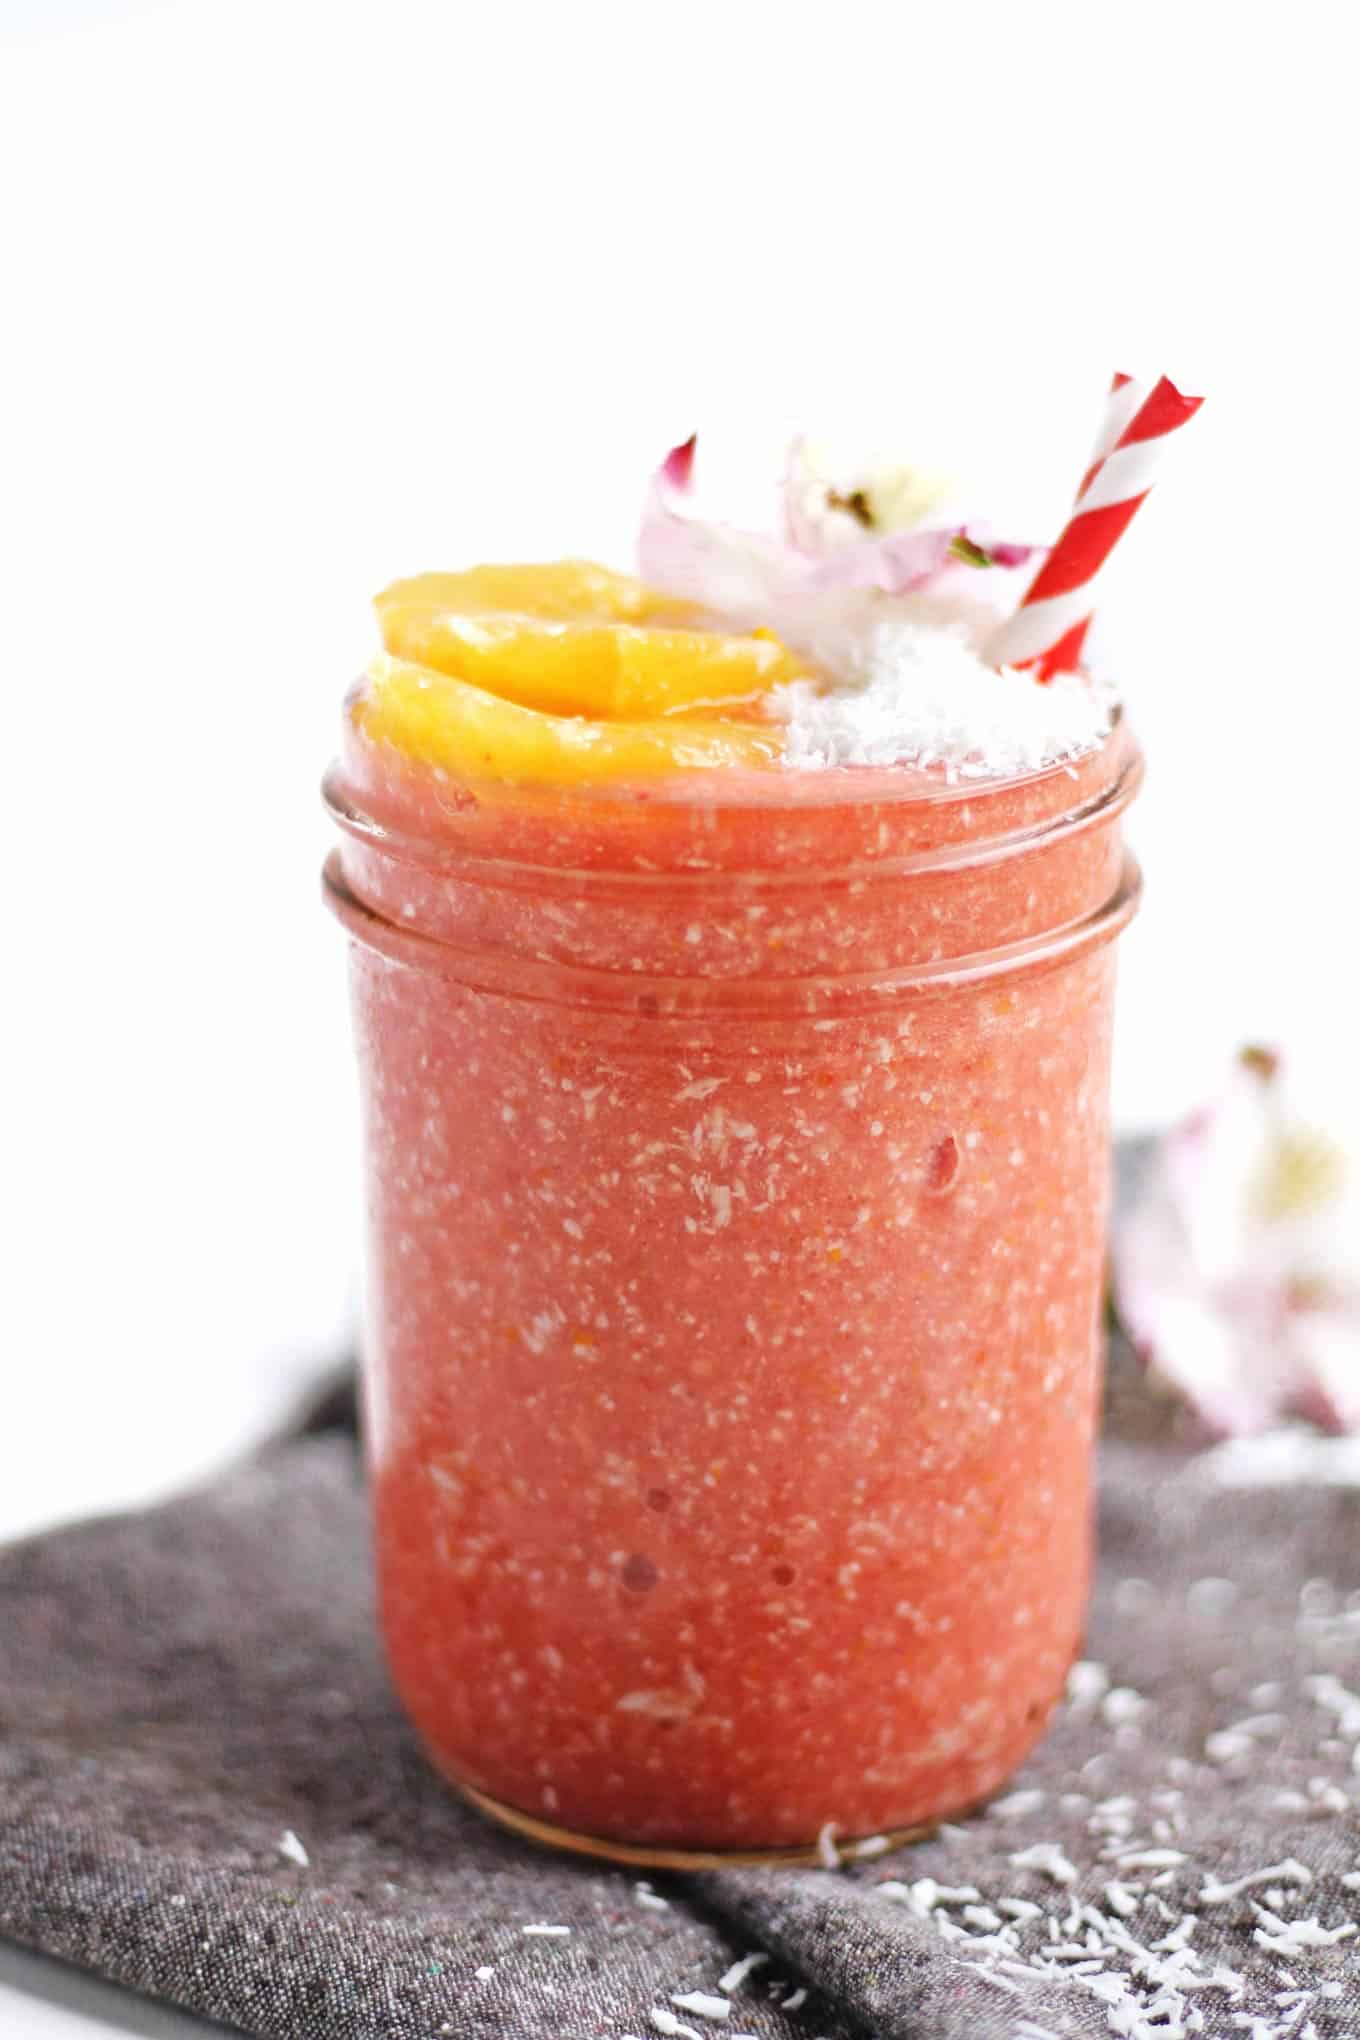 The perfect spring time smoothie! This tropical, refreshing meyer lemon strawberry smoothie with coconut includes an entire meyer lemon. A no waste recipe! Vegan, gluten free, clean eating, sugar free, dairy free, amazing. // Rhubarbarians